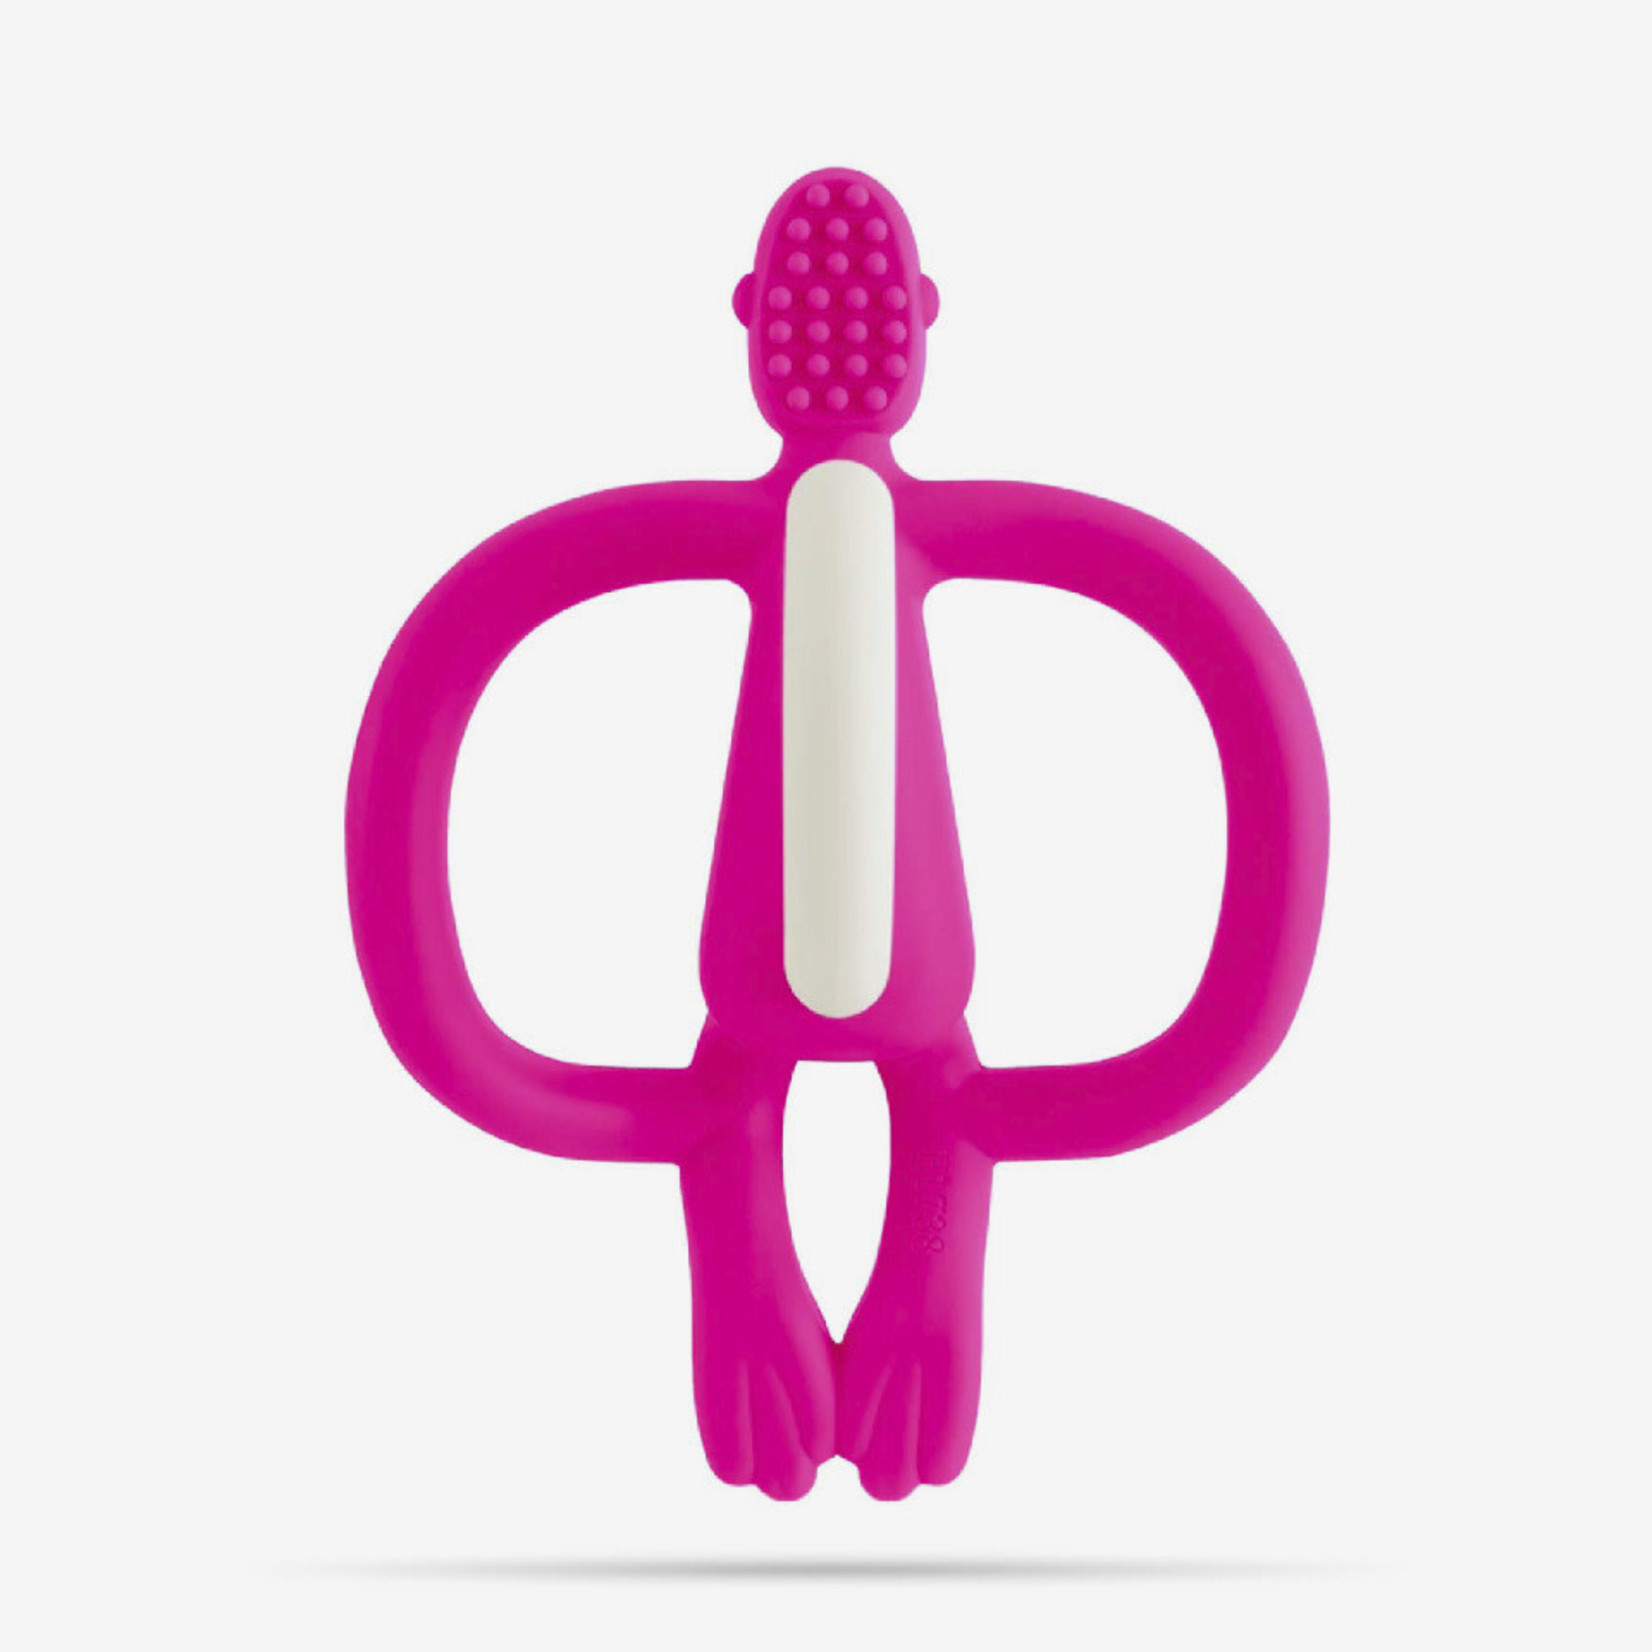 Matchstick Monkey Teething Toy and Gel Applicator-Pink